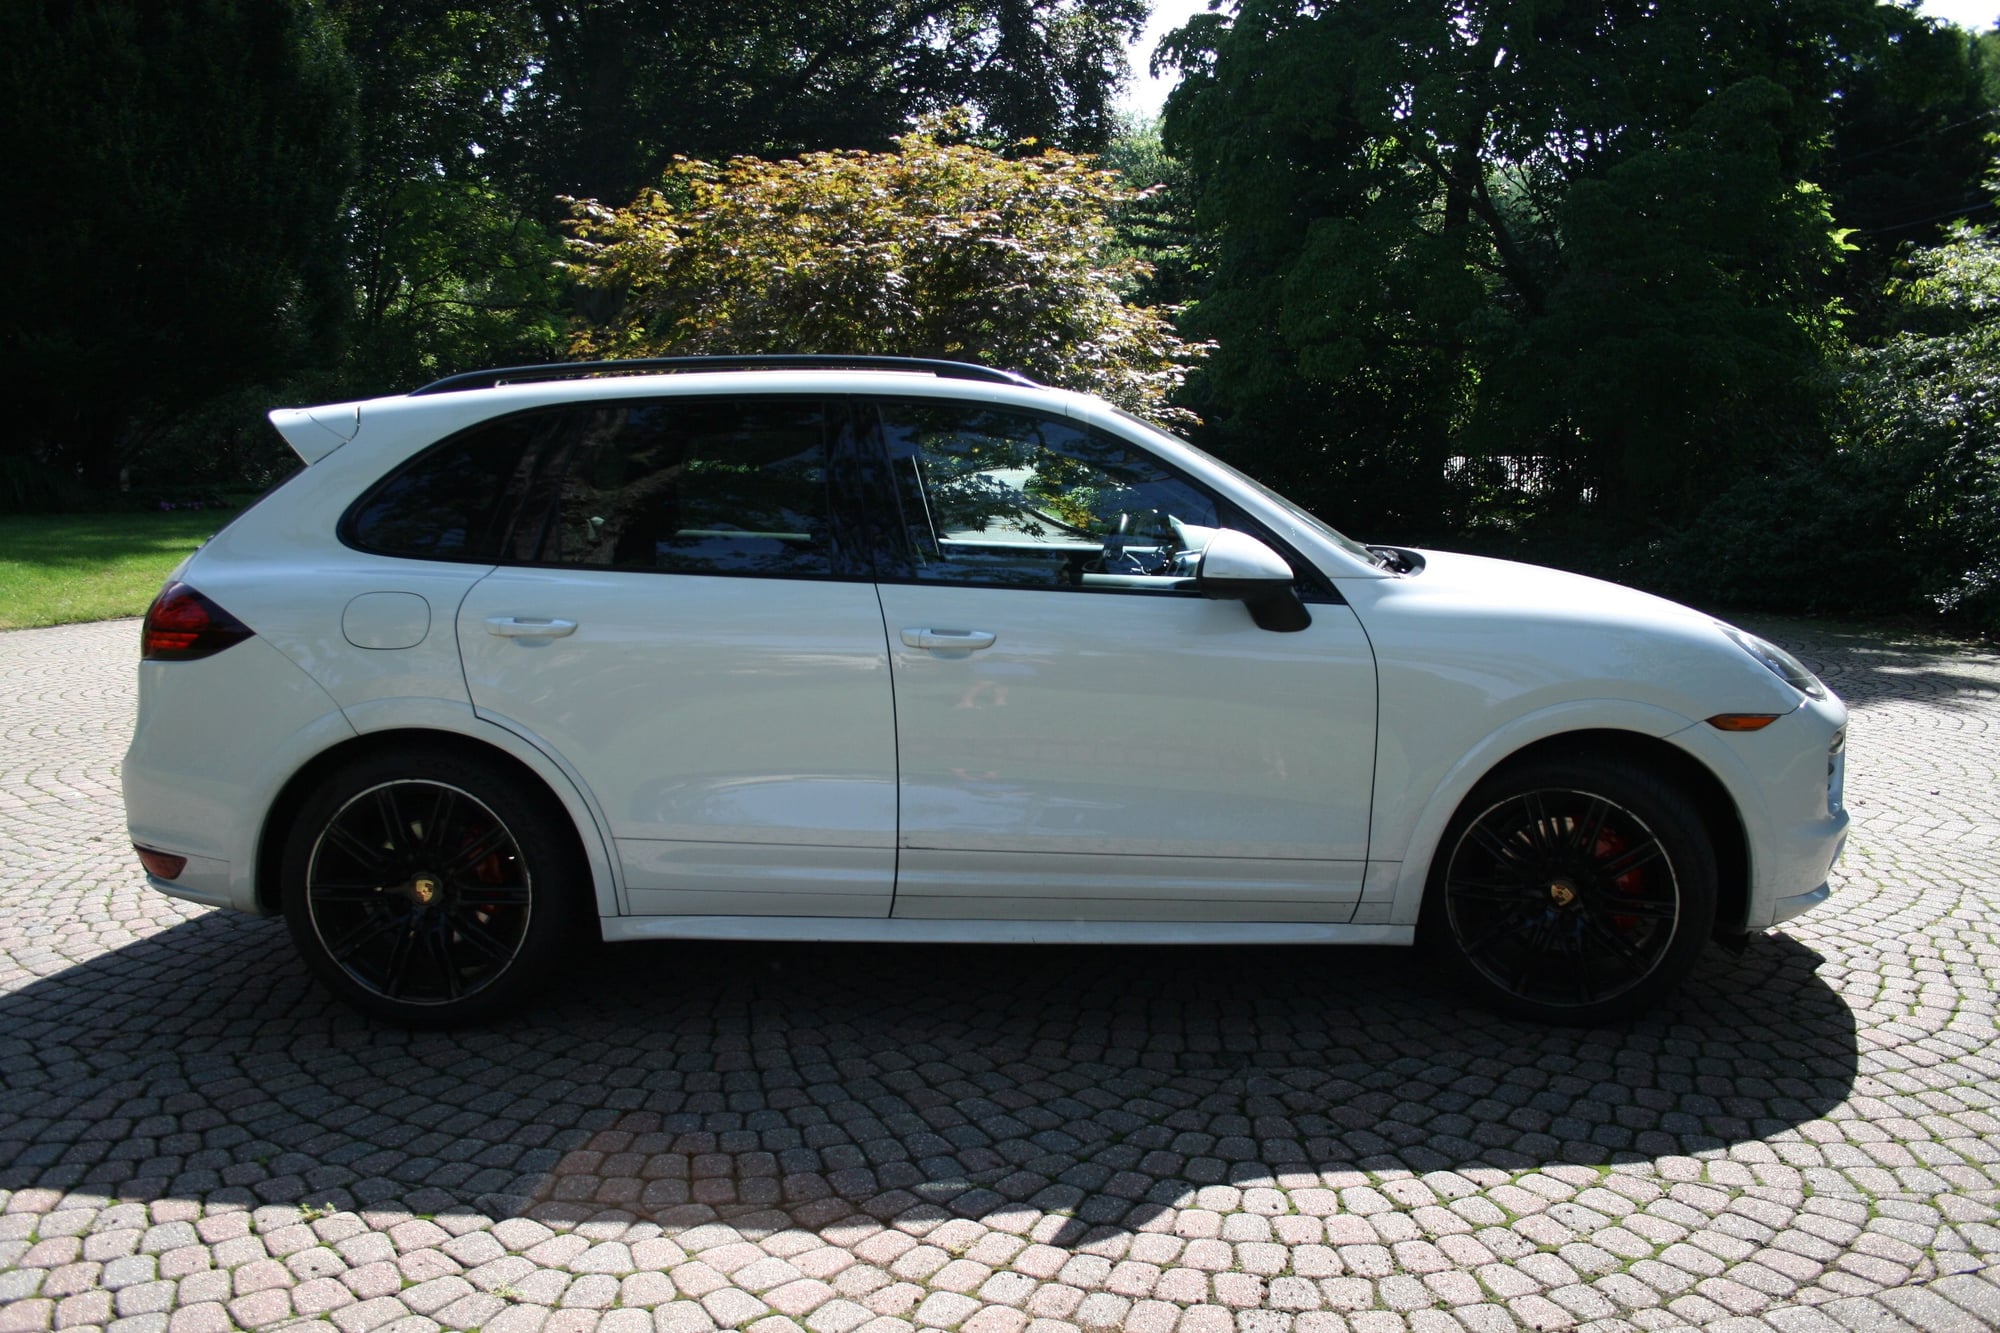 2014 Porsche Cayenne - 2014 Cayenne GTS- LAST OF NA! Great Spec - Used - VIN WP1AD2A2XELA70226 - 8 cyl - AWD - Automatic - SUV - White - Great Neck, NY 11023, United States